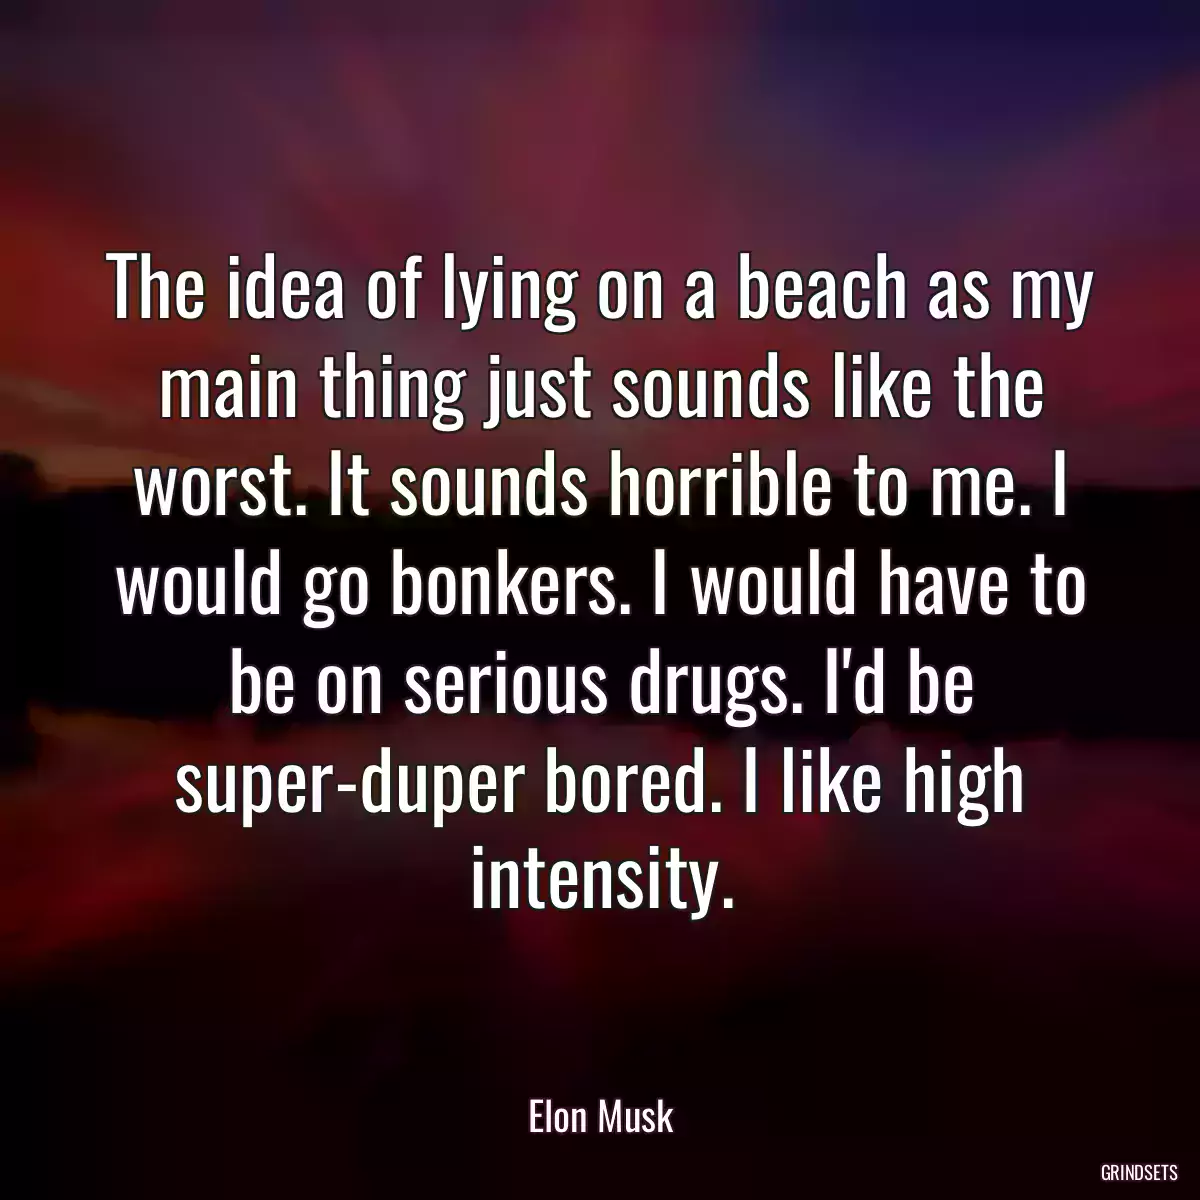 The idea of lying on a beach as my main thing just sounds like the worst. It sounds horrible to me. I would go bonkers. I would have to be on serious drugs. I\'d be super-duper bored. I like high intensity.